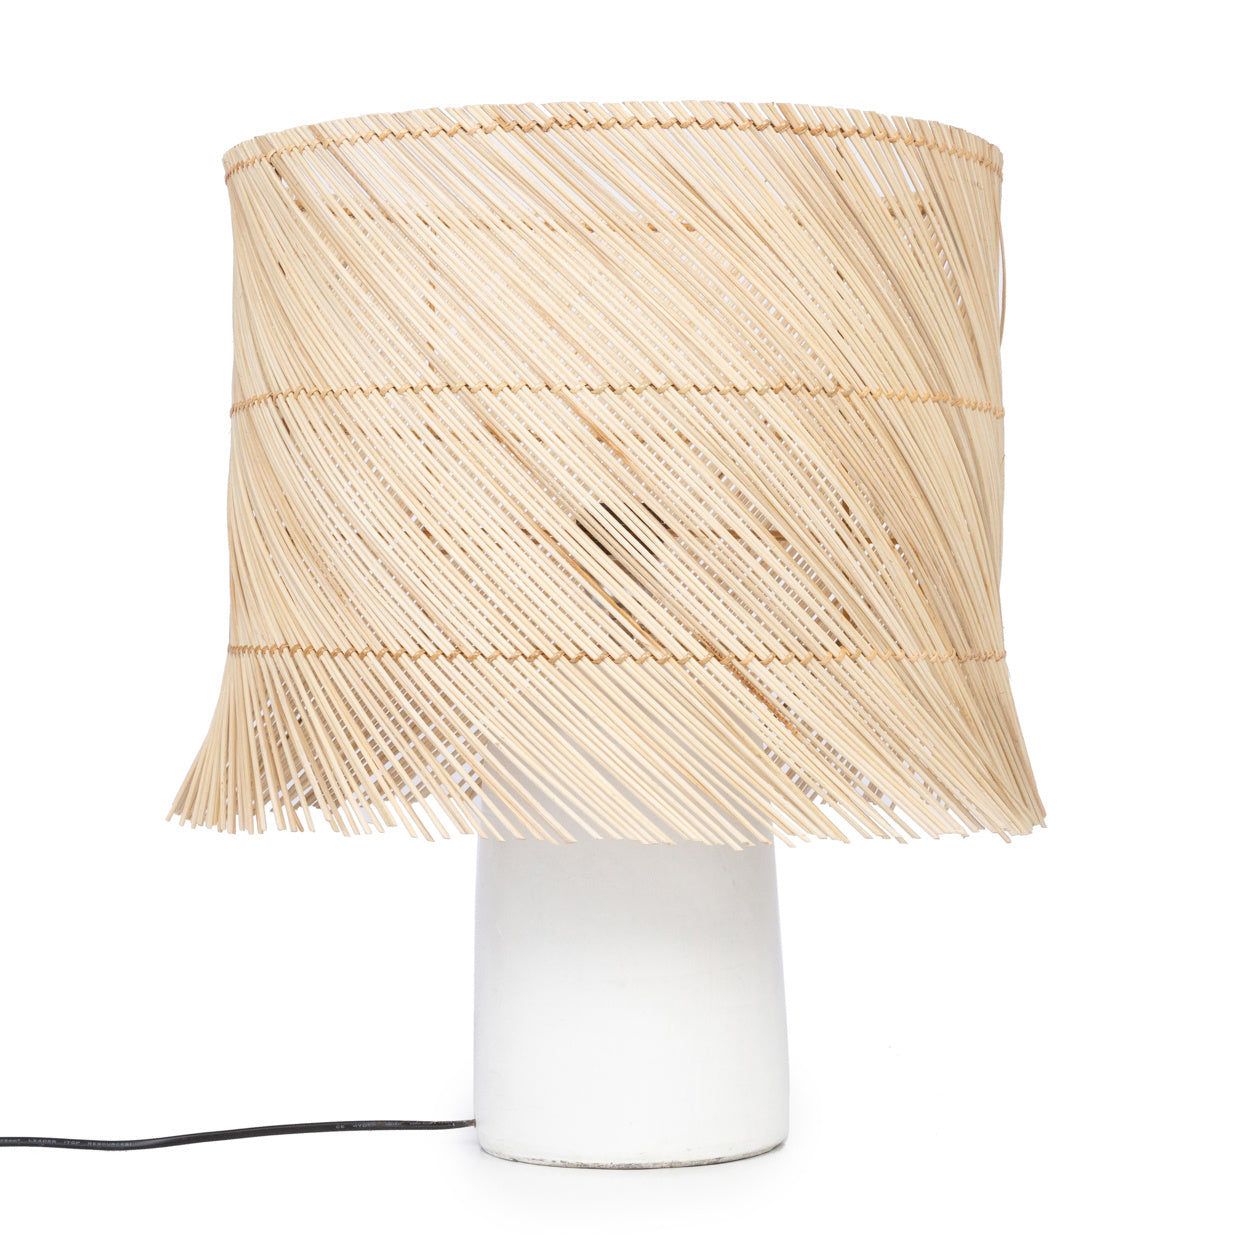 The Rattan Table Lamp 